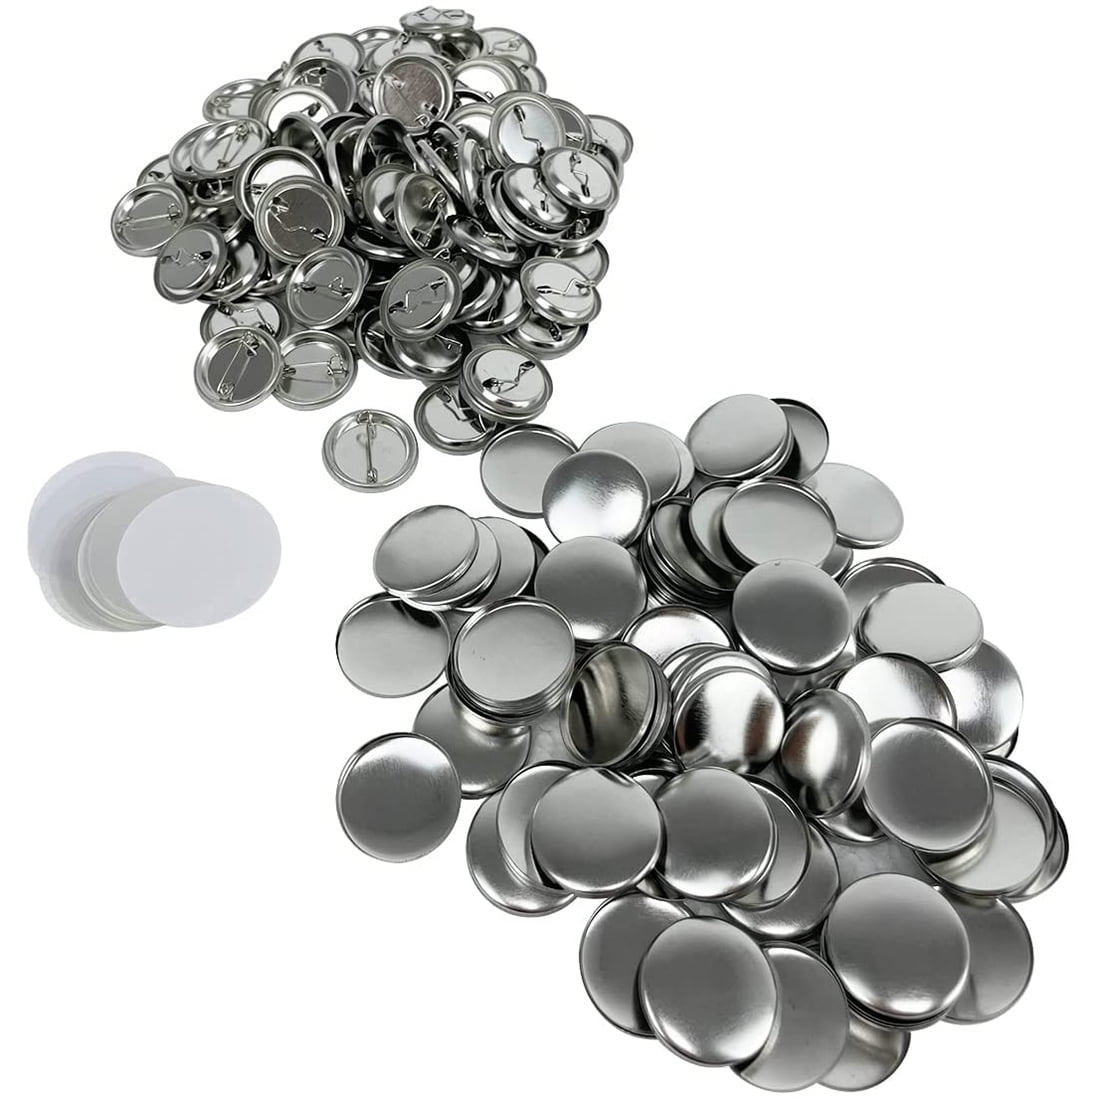 INTBUYING 100set 2.3in/58mm Round Badges Pin Back Button Metal for DIY  Craft 